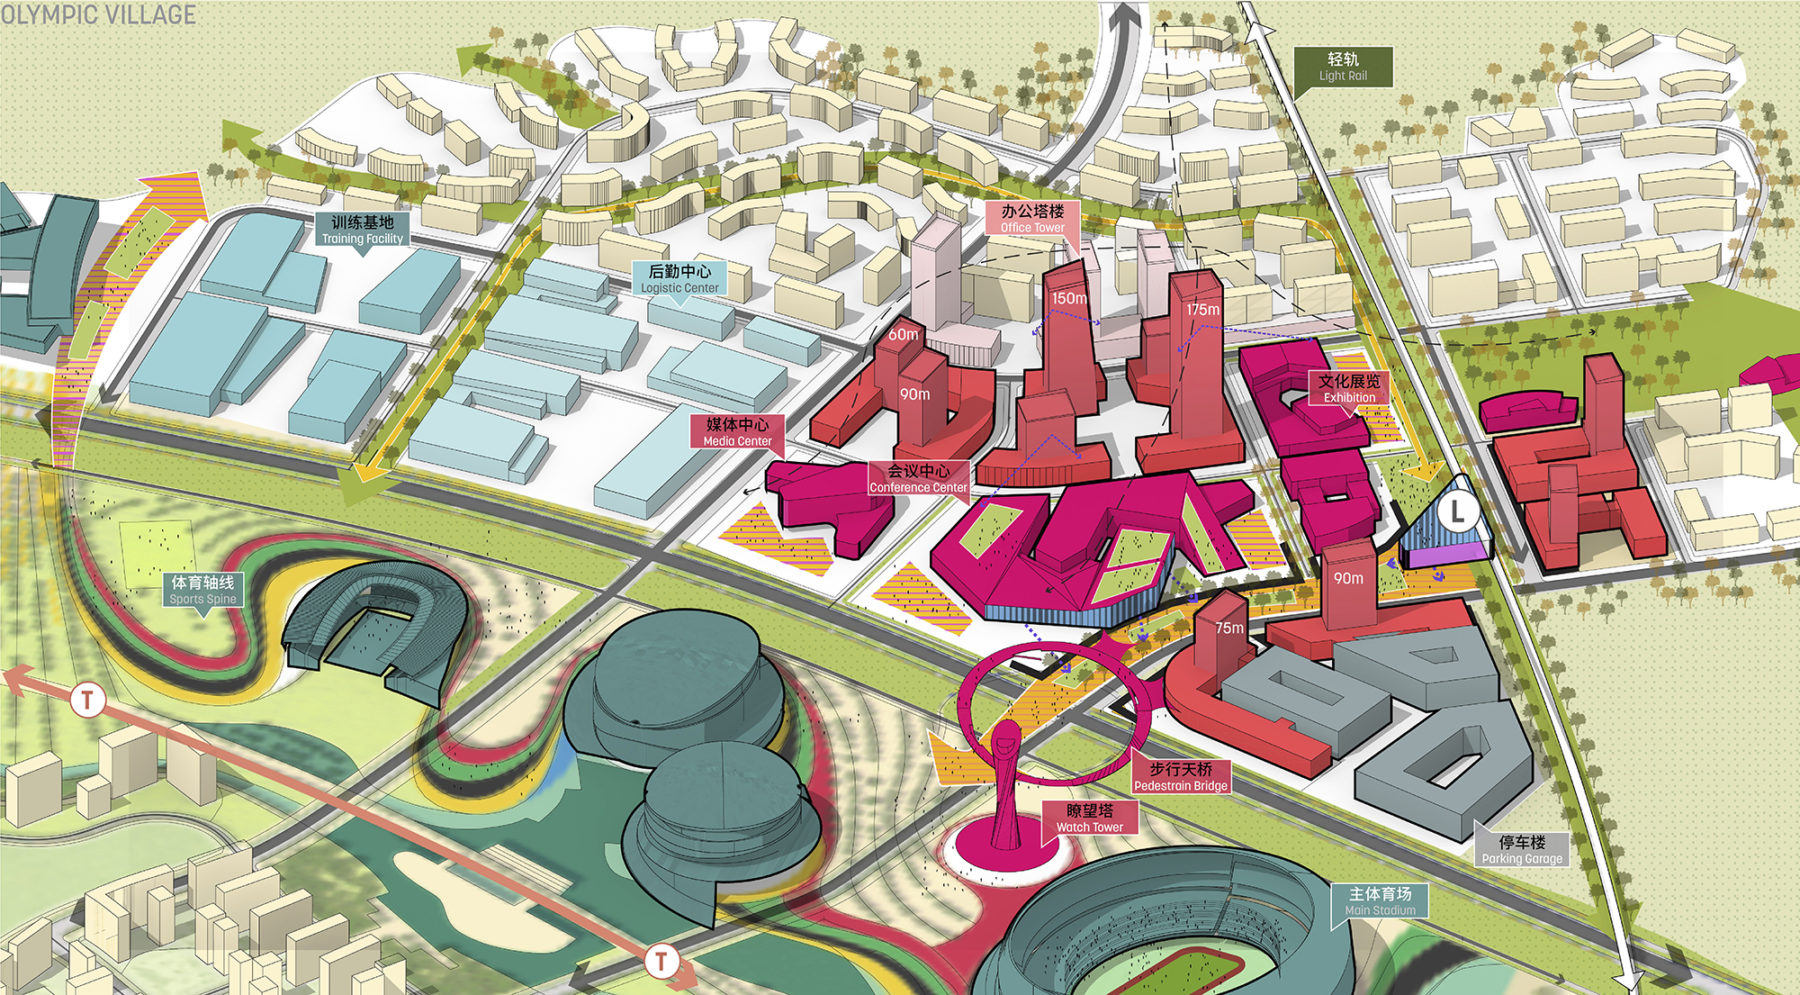 sports axis and olympic village diagram